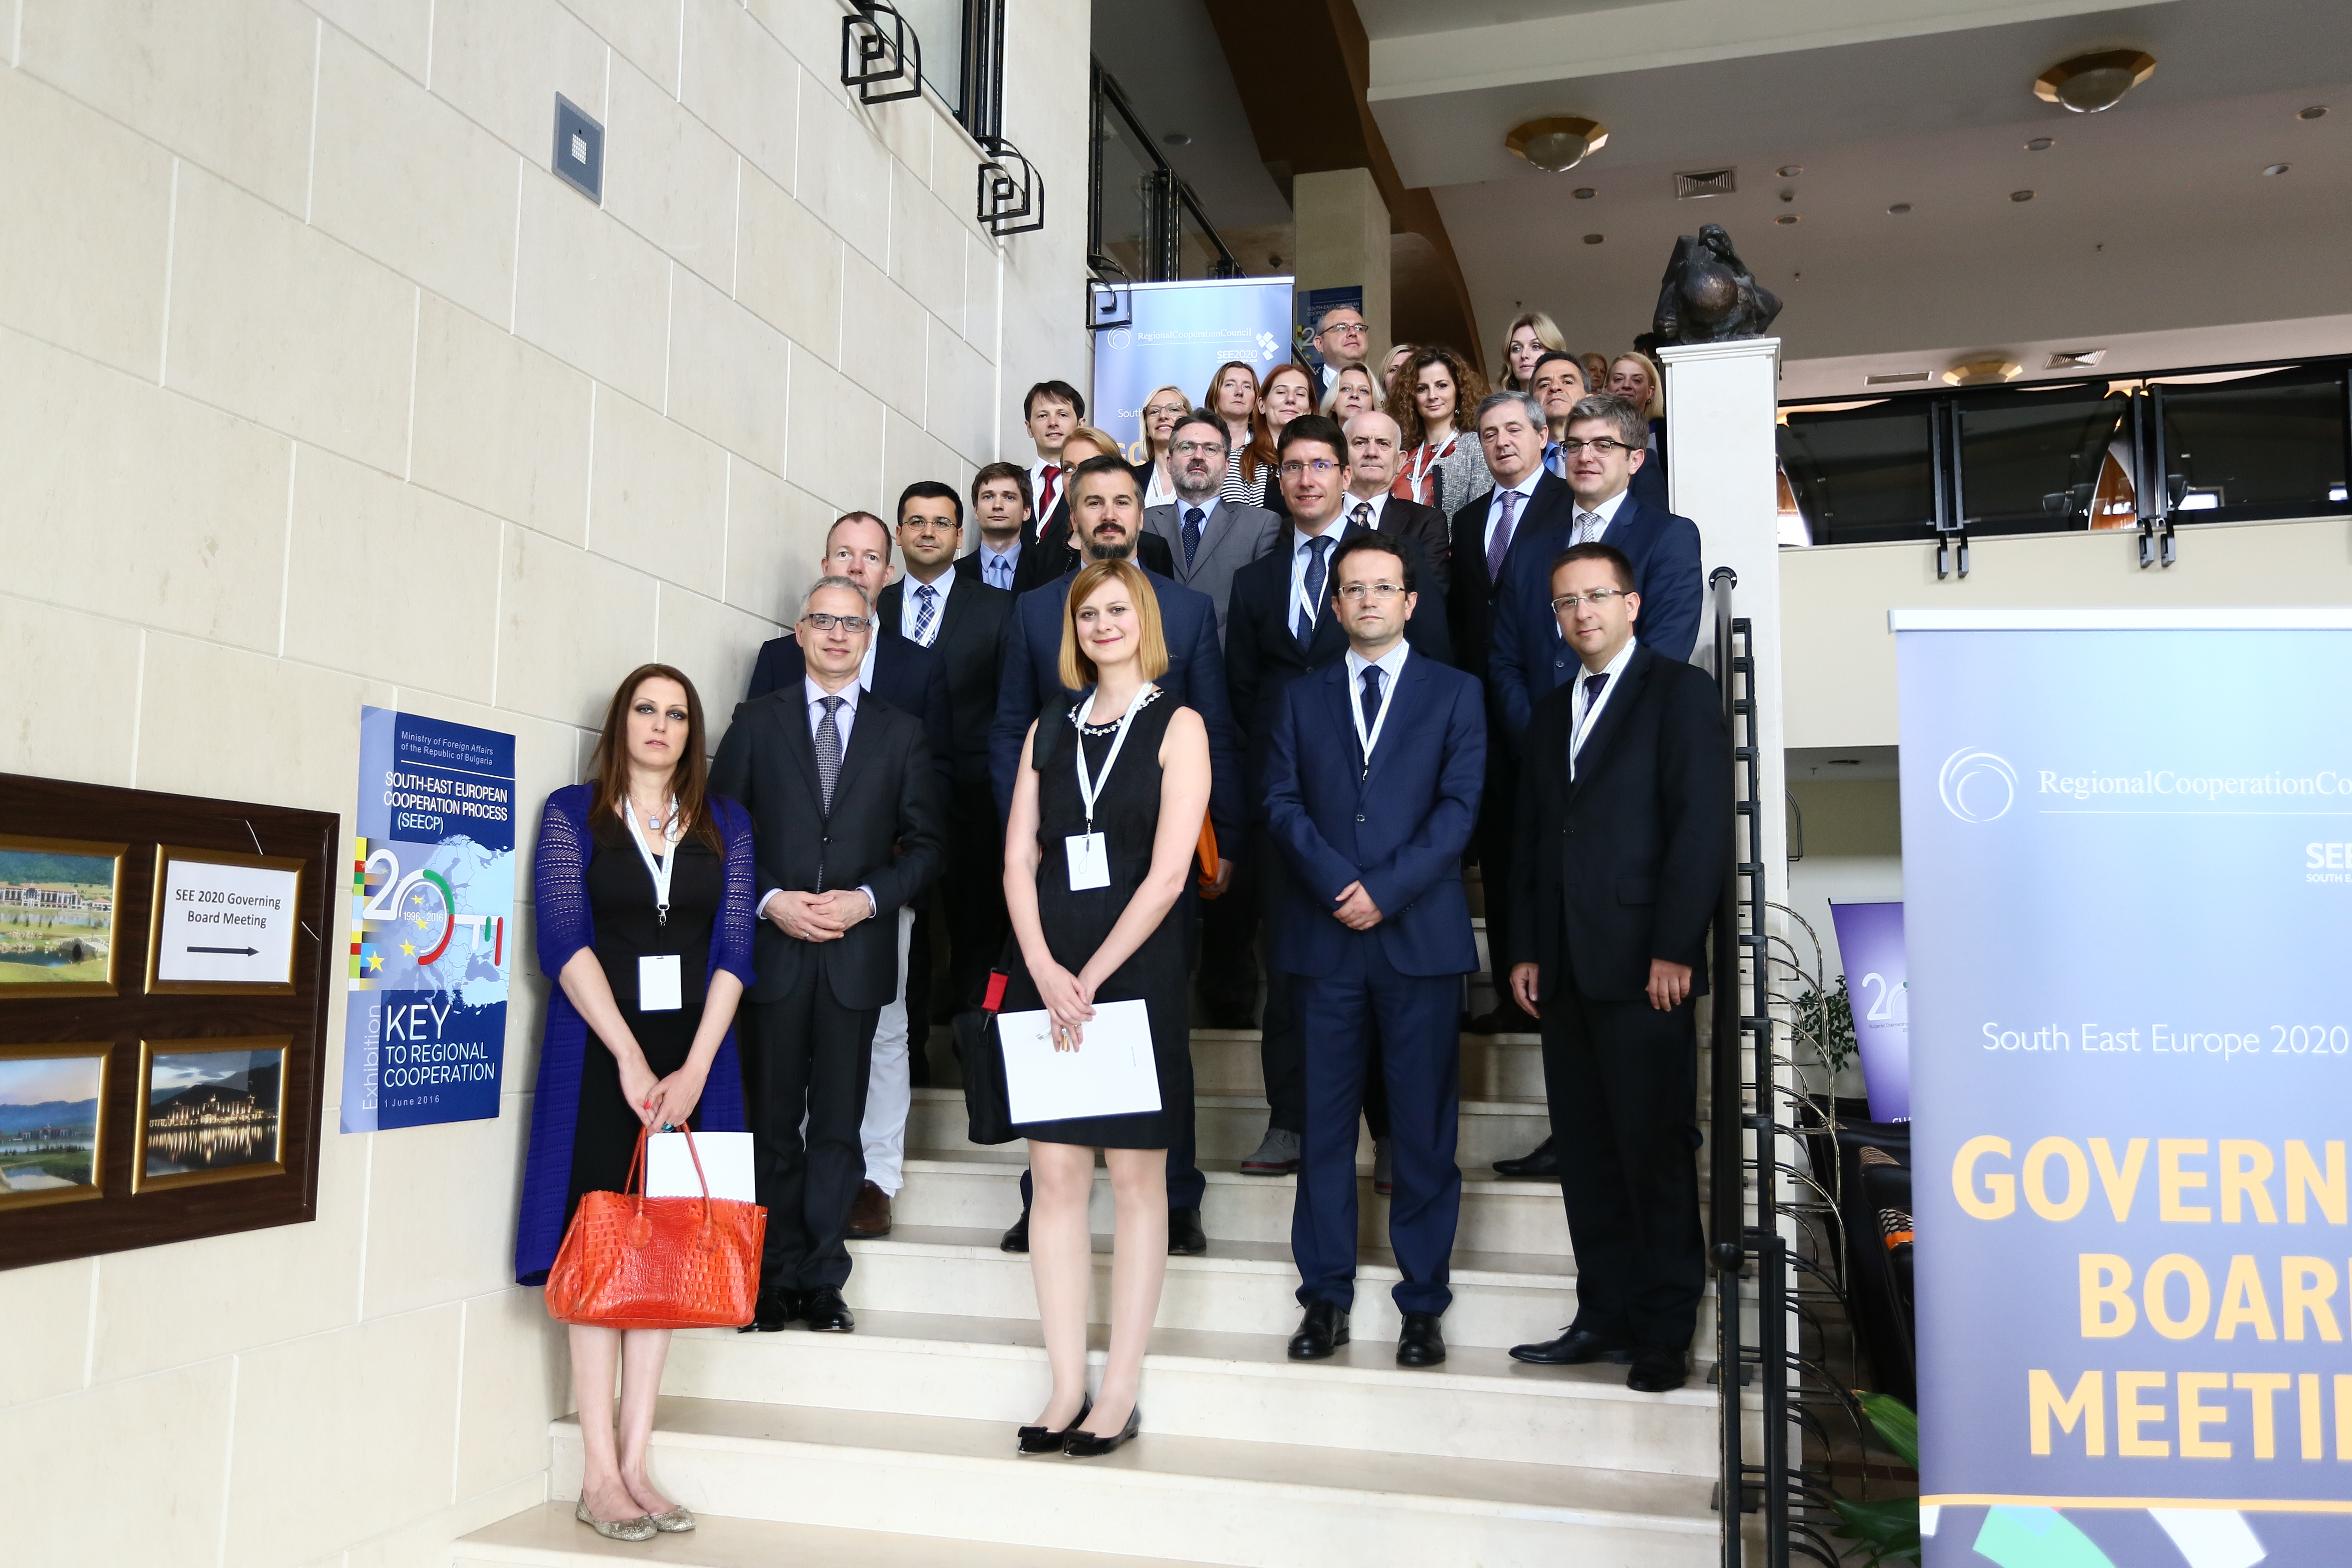 Participants of the third meeting of the Governing Board of the Regional Cooperation Council’s (RCC) South East Europe 2020 (SEE 2020) Strategy that took place in Pravets (Bulgaria), on 30 May 2016. (Photo: Regional Cooperation Council/Ivo Petkov) 